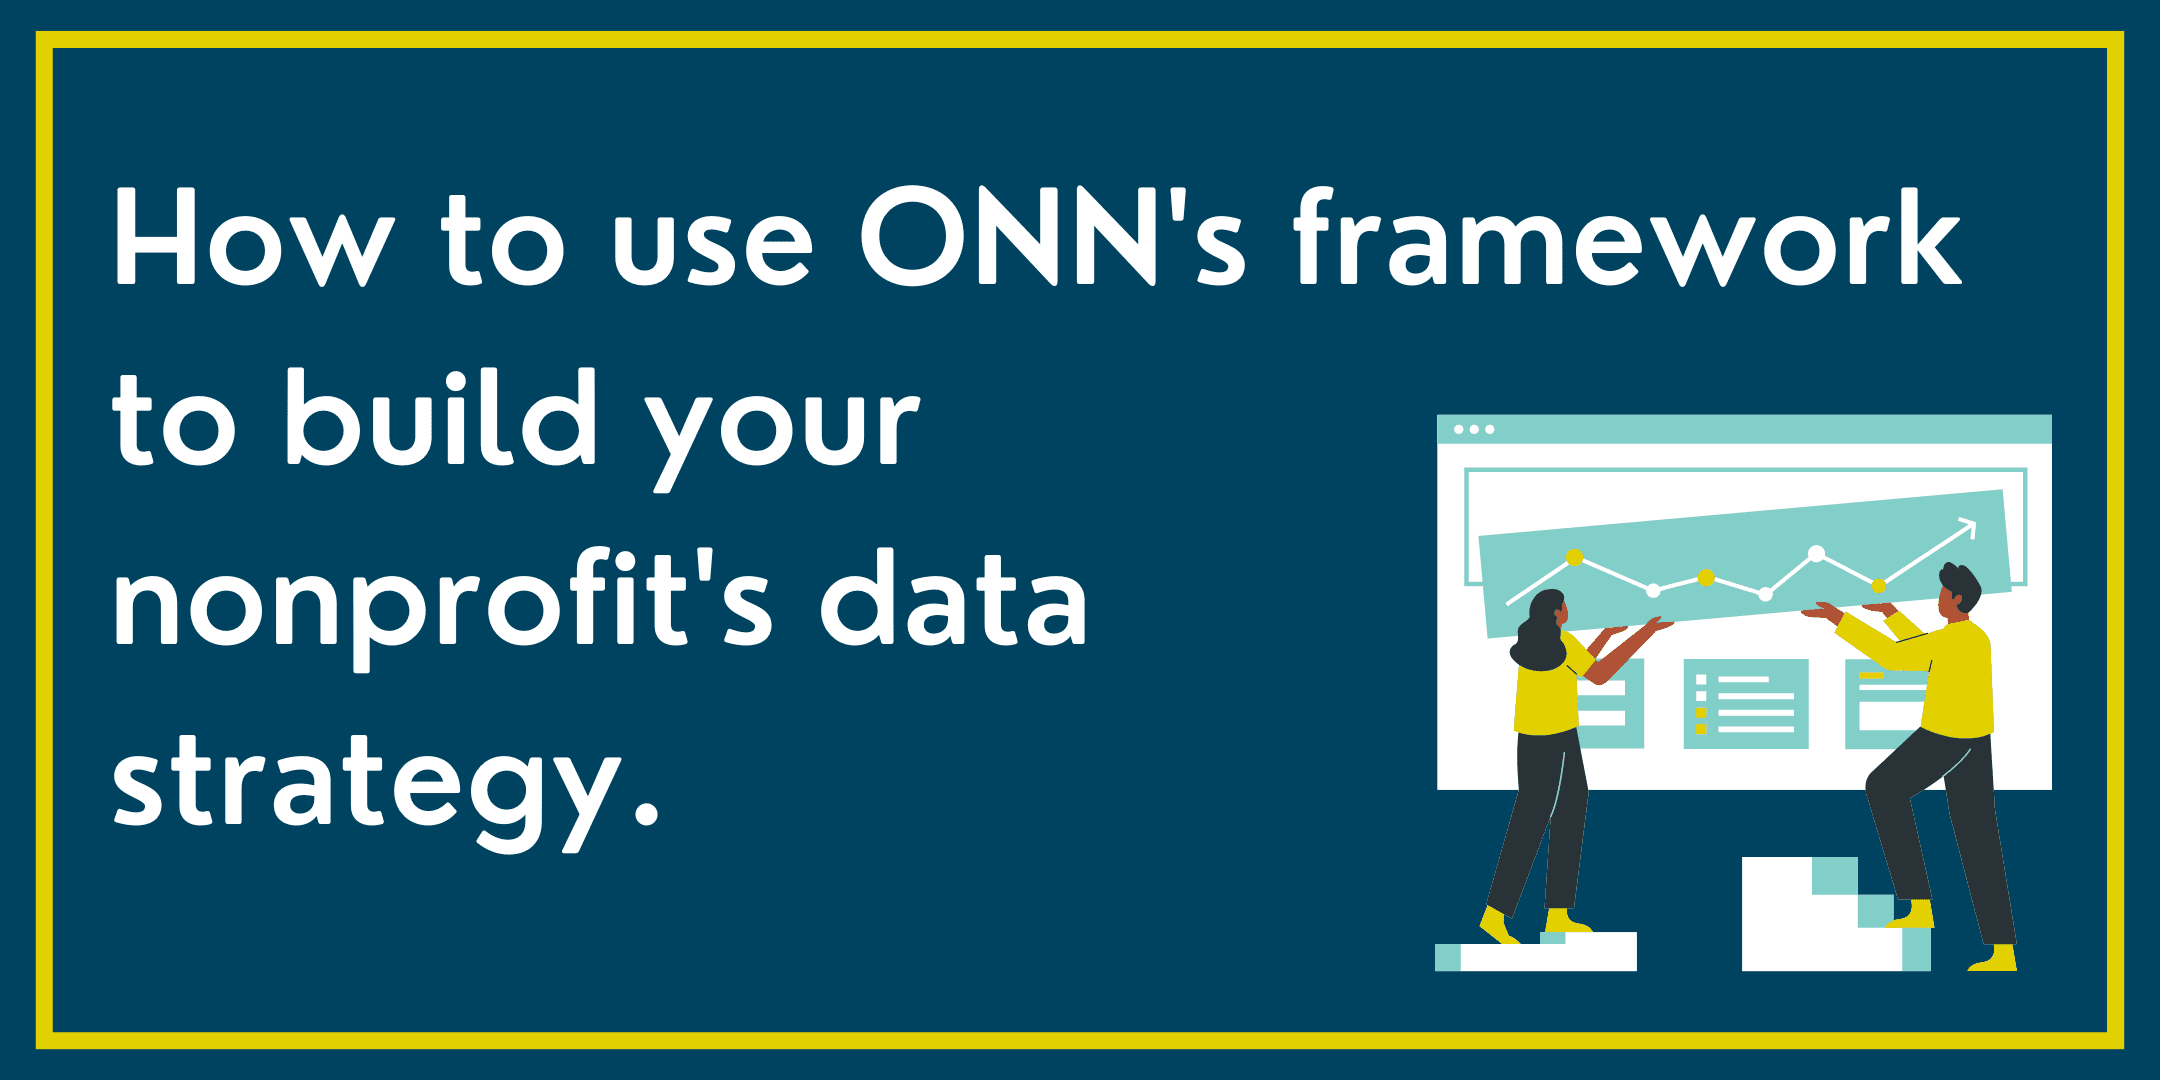 Dark blue background with yellow border. Icon showing two people in front of data on the right side. In white, on the left side is text, "How to use ONN's framework to build your nonprofit's data strategy."